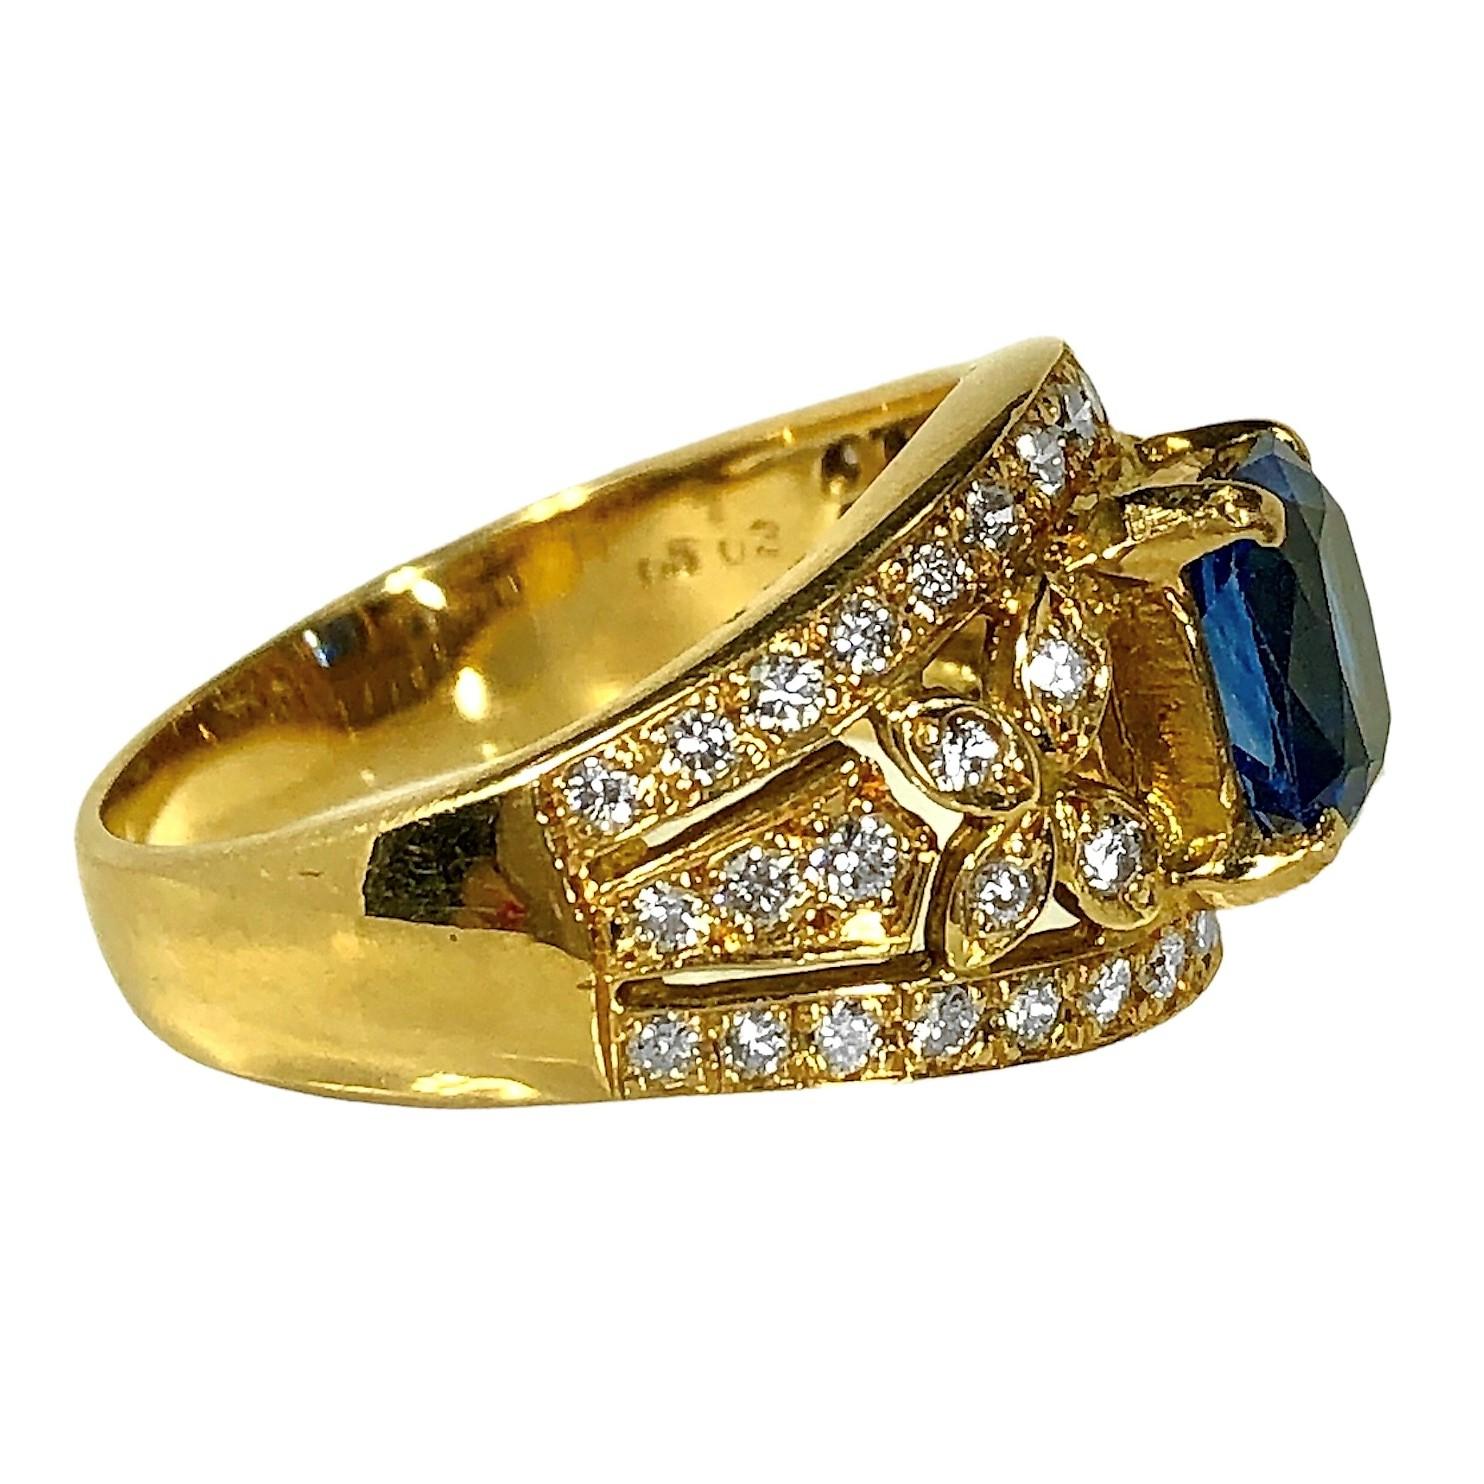 Women's 18K Yellow Gold, Diamond and Sapphire Cocktail Ring For Sale